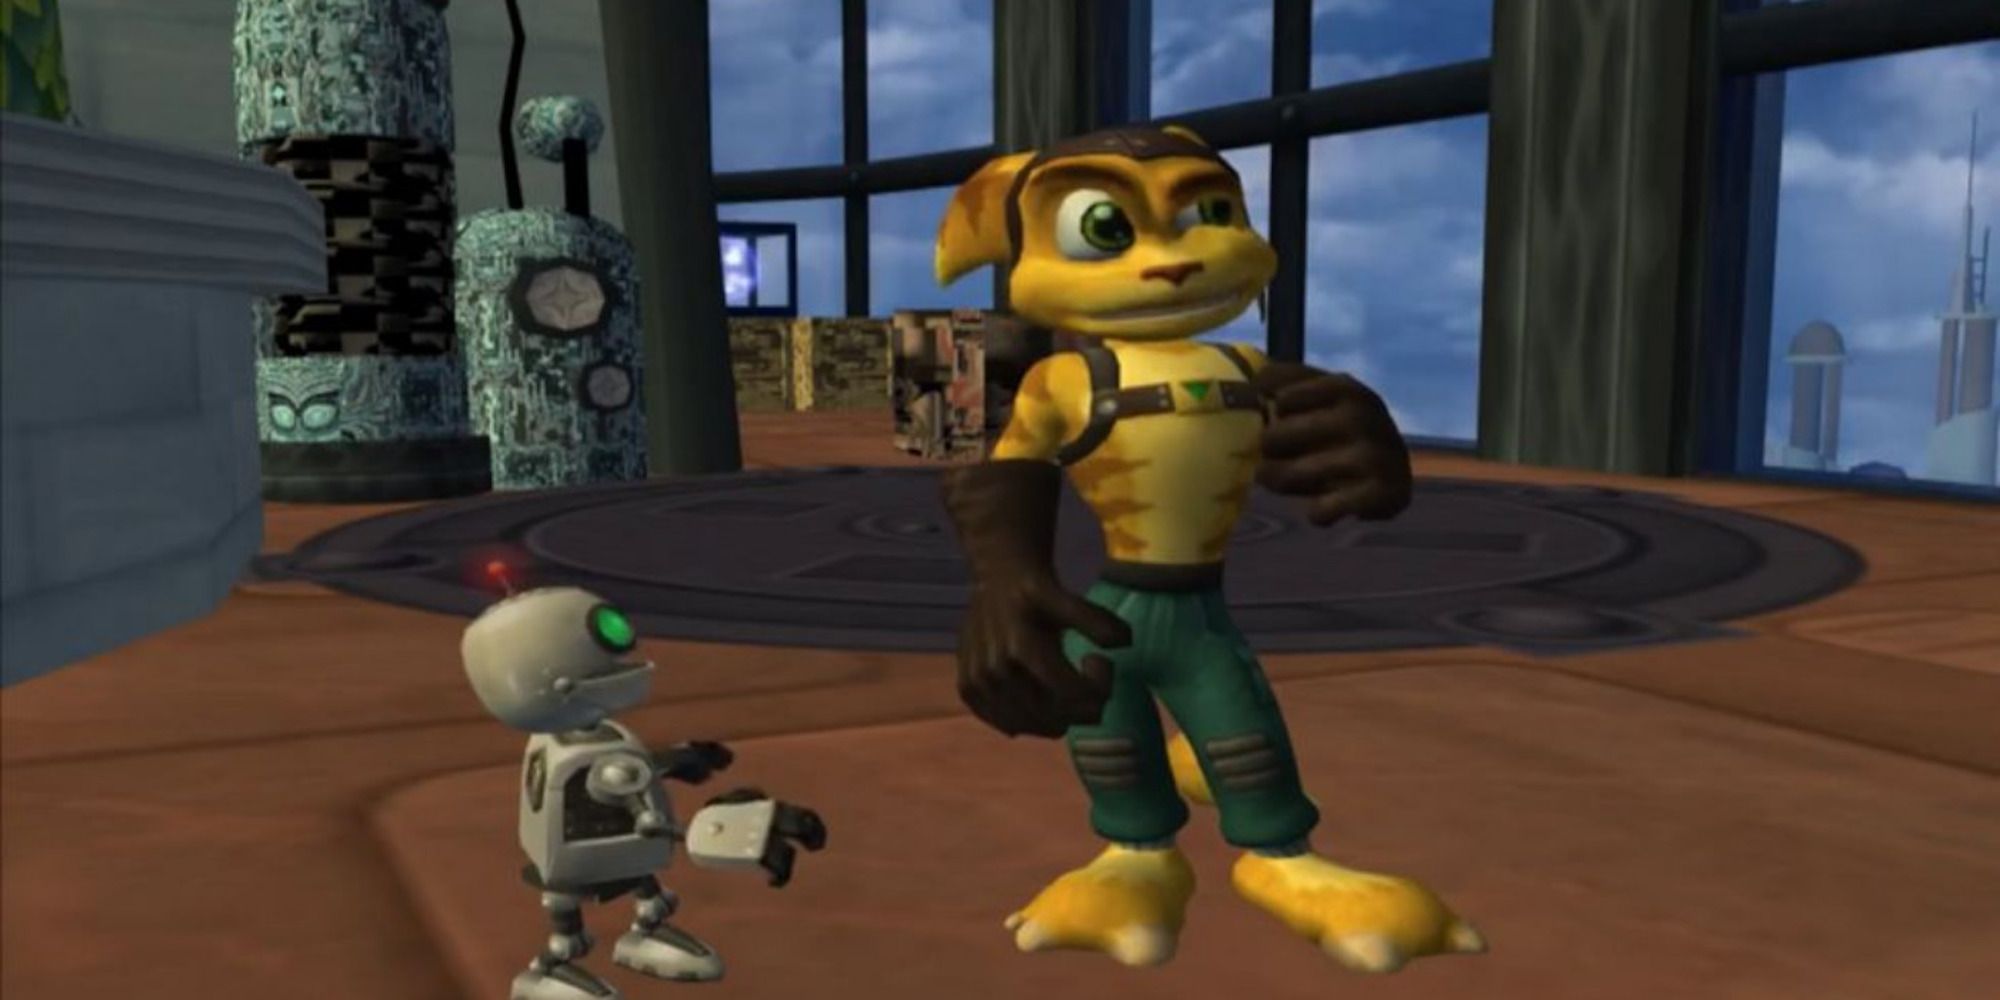 Clank and Ratchet from Ratchet & Clank